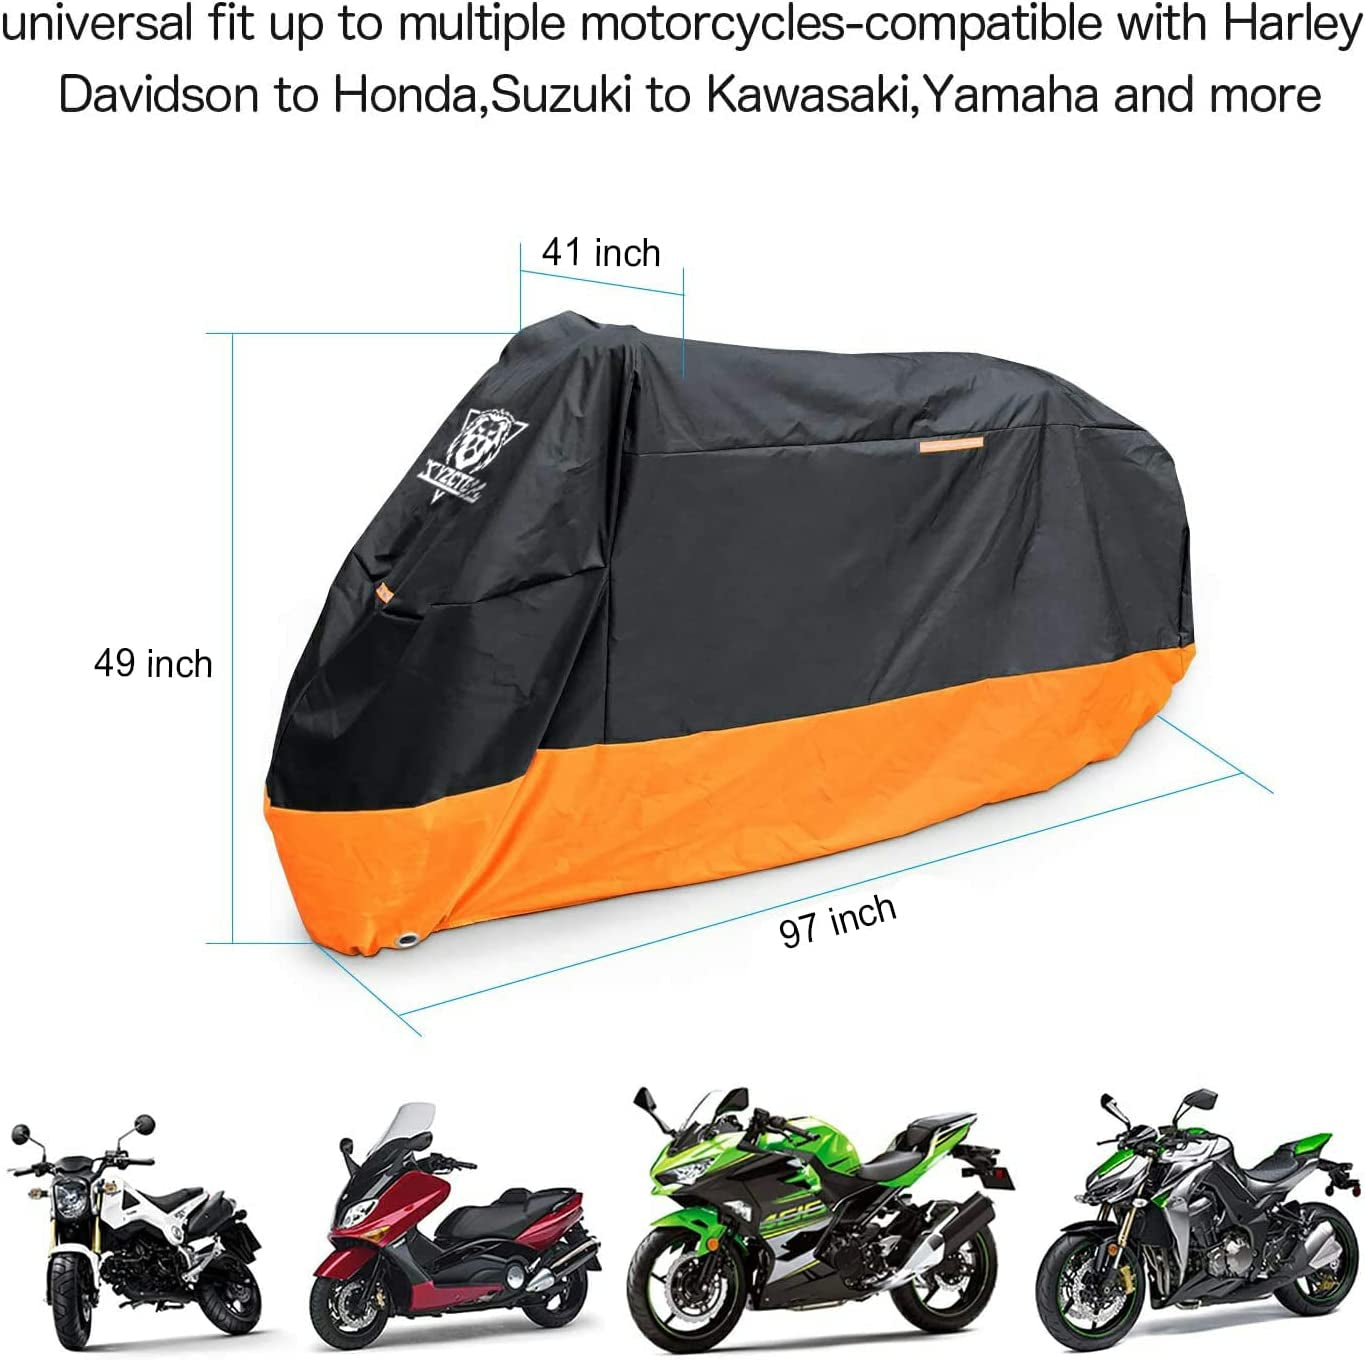 Motorcycle Cover – All Season Waterproof Outdoor Protection – Precision Fit up to 96 Inch Tour Bikes, Choppers and Cruisers – Protect against Dust, Debris, Rain and Weather(Xl,Black& Orange)